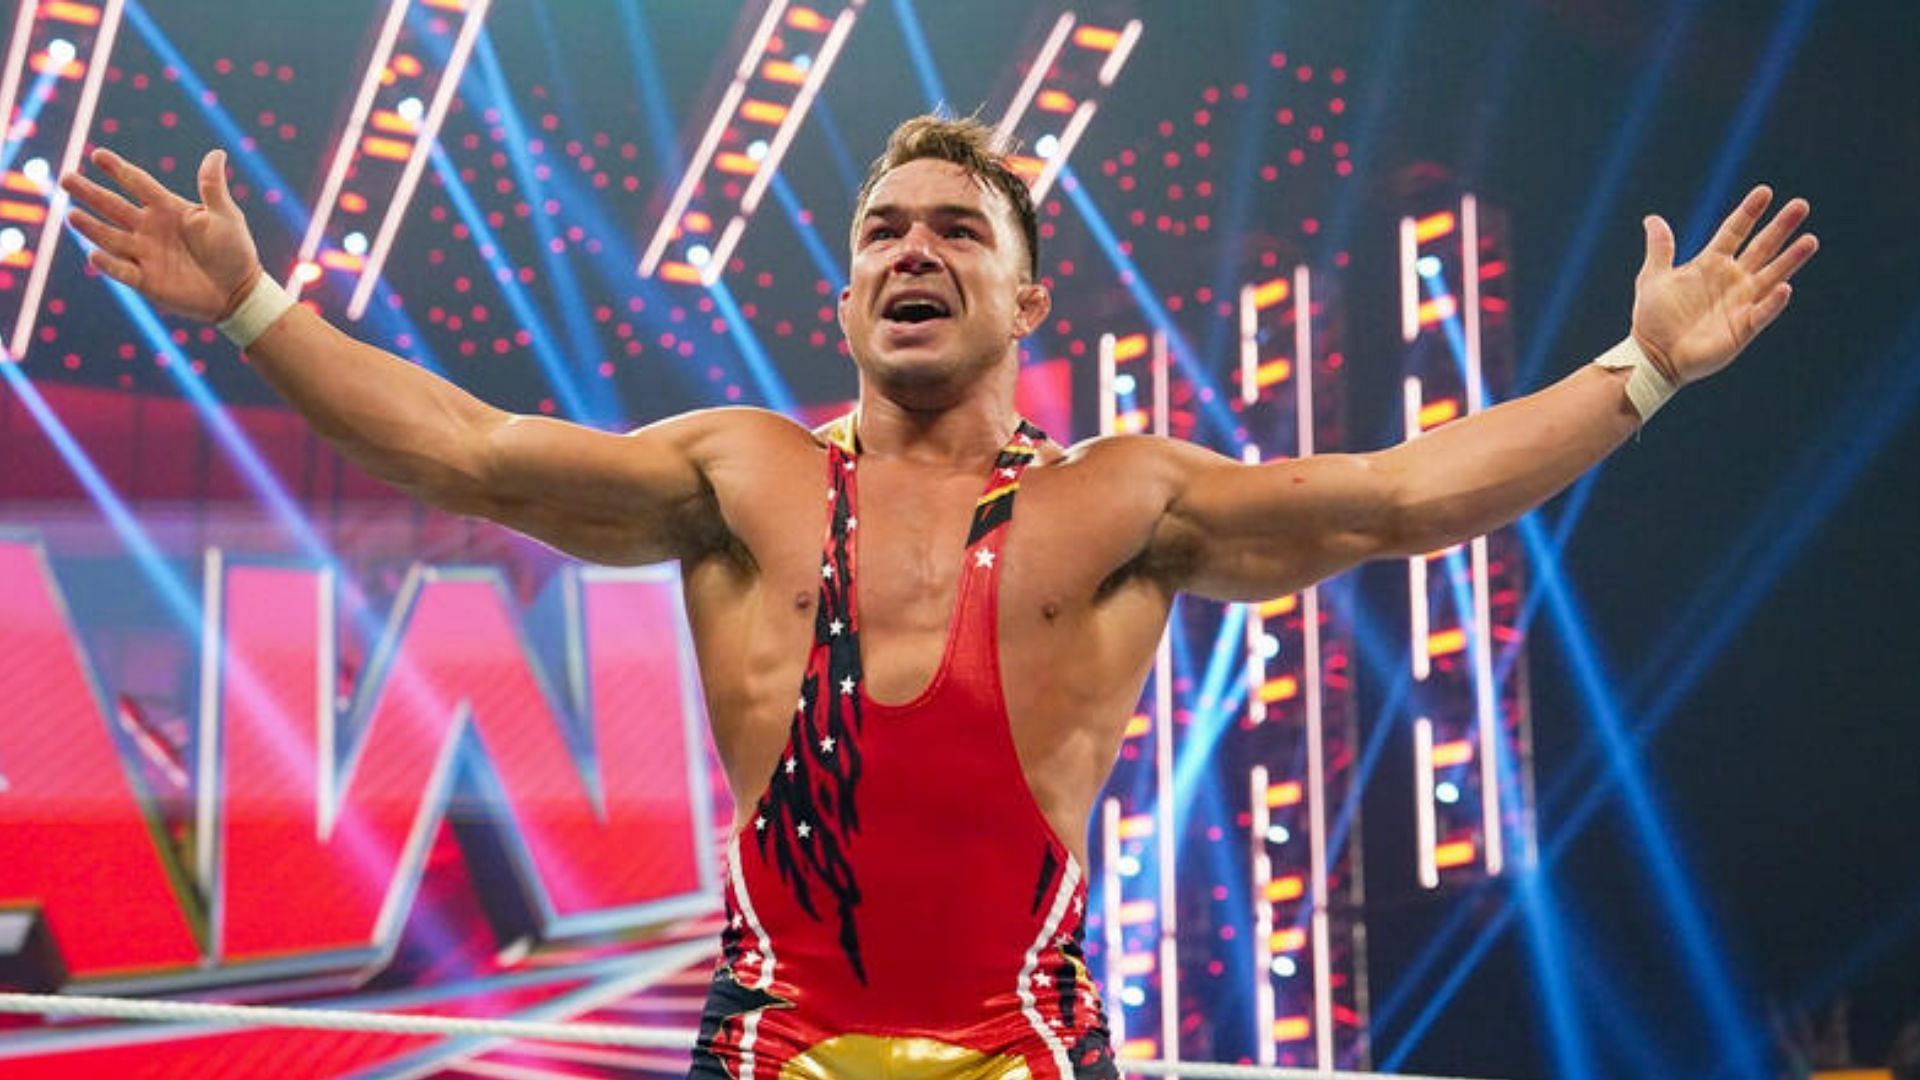 Gable competed in a Gauntlet Match tonight on RAW.